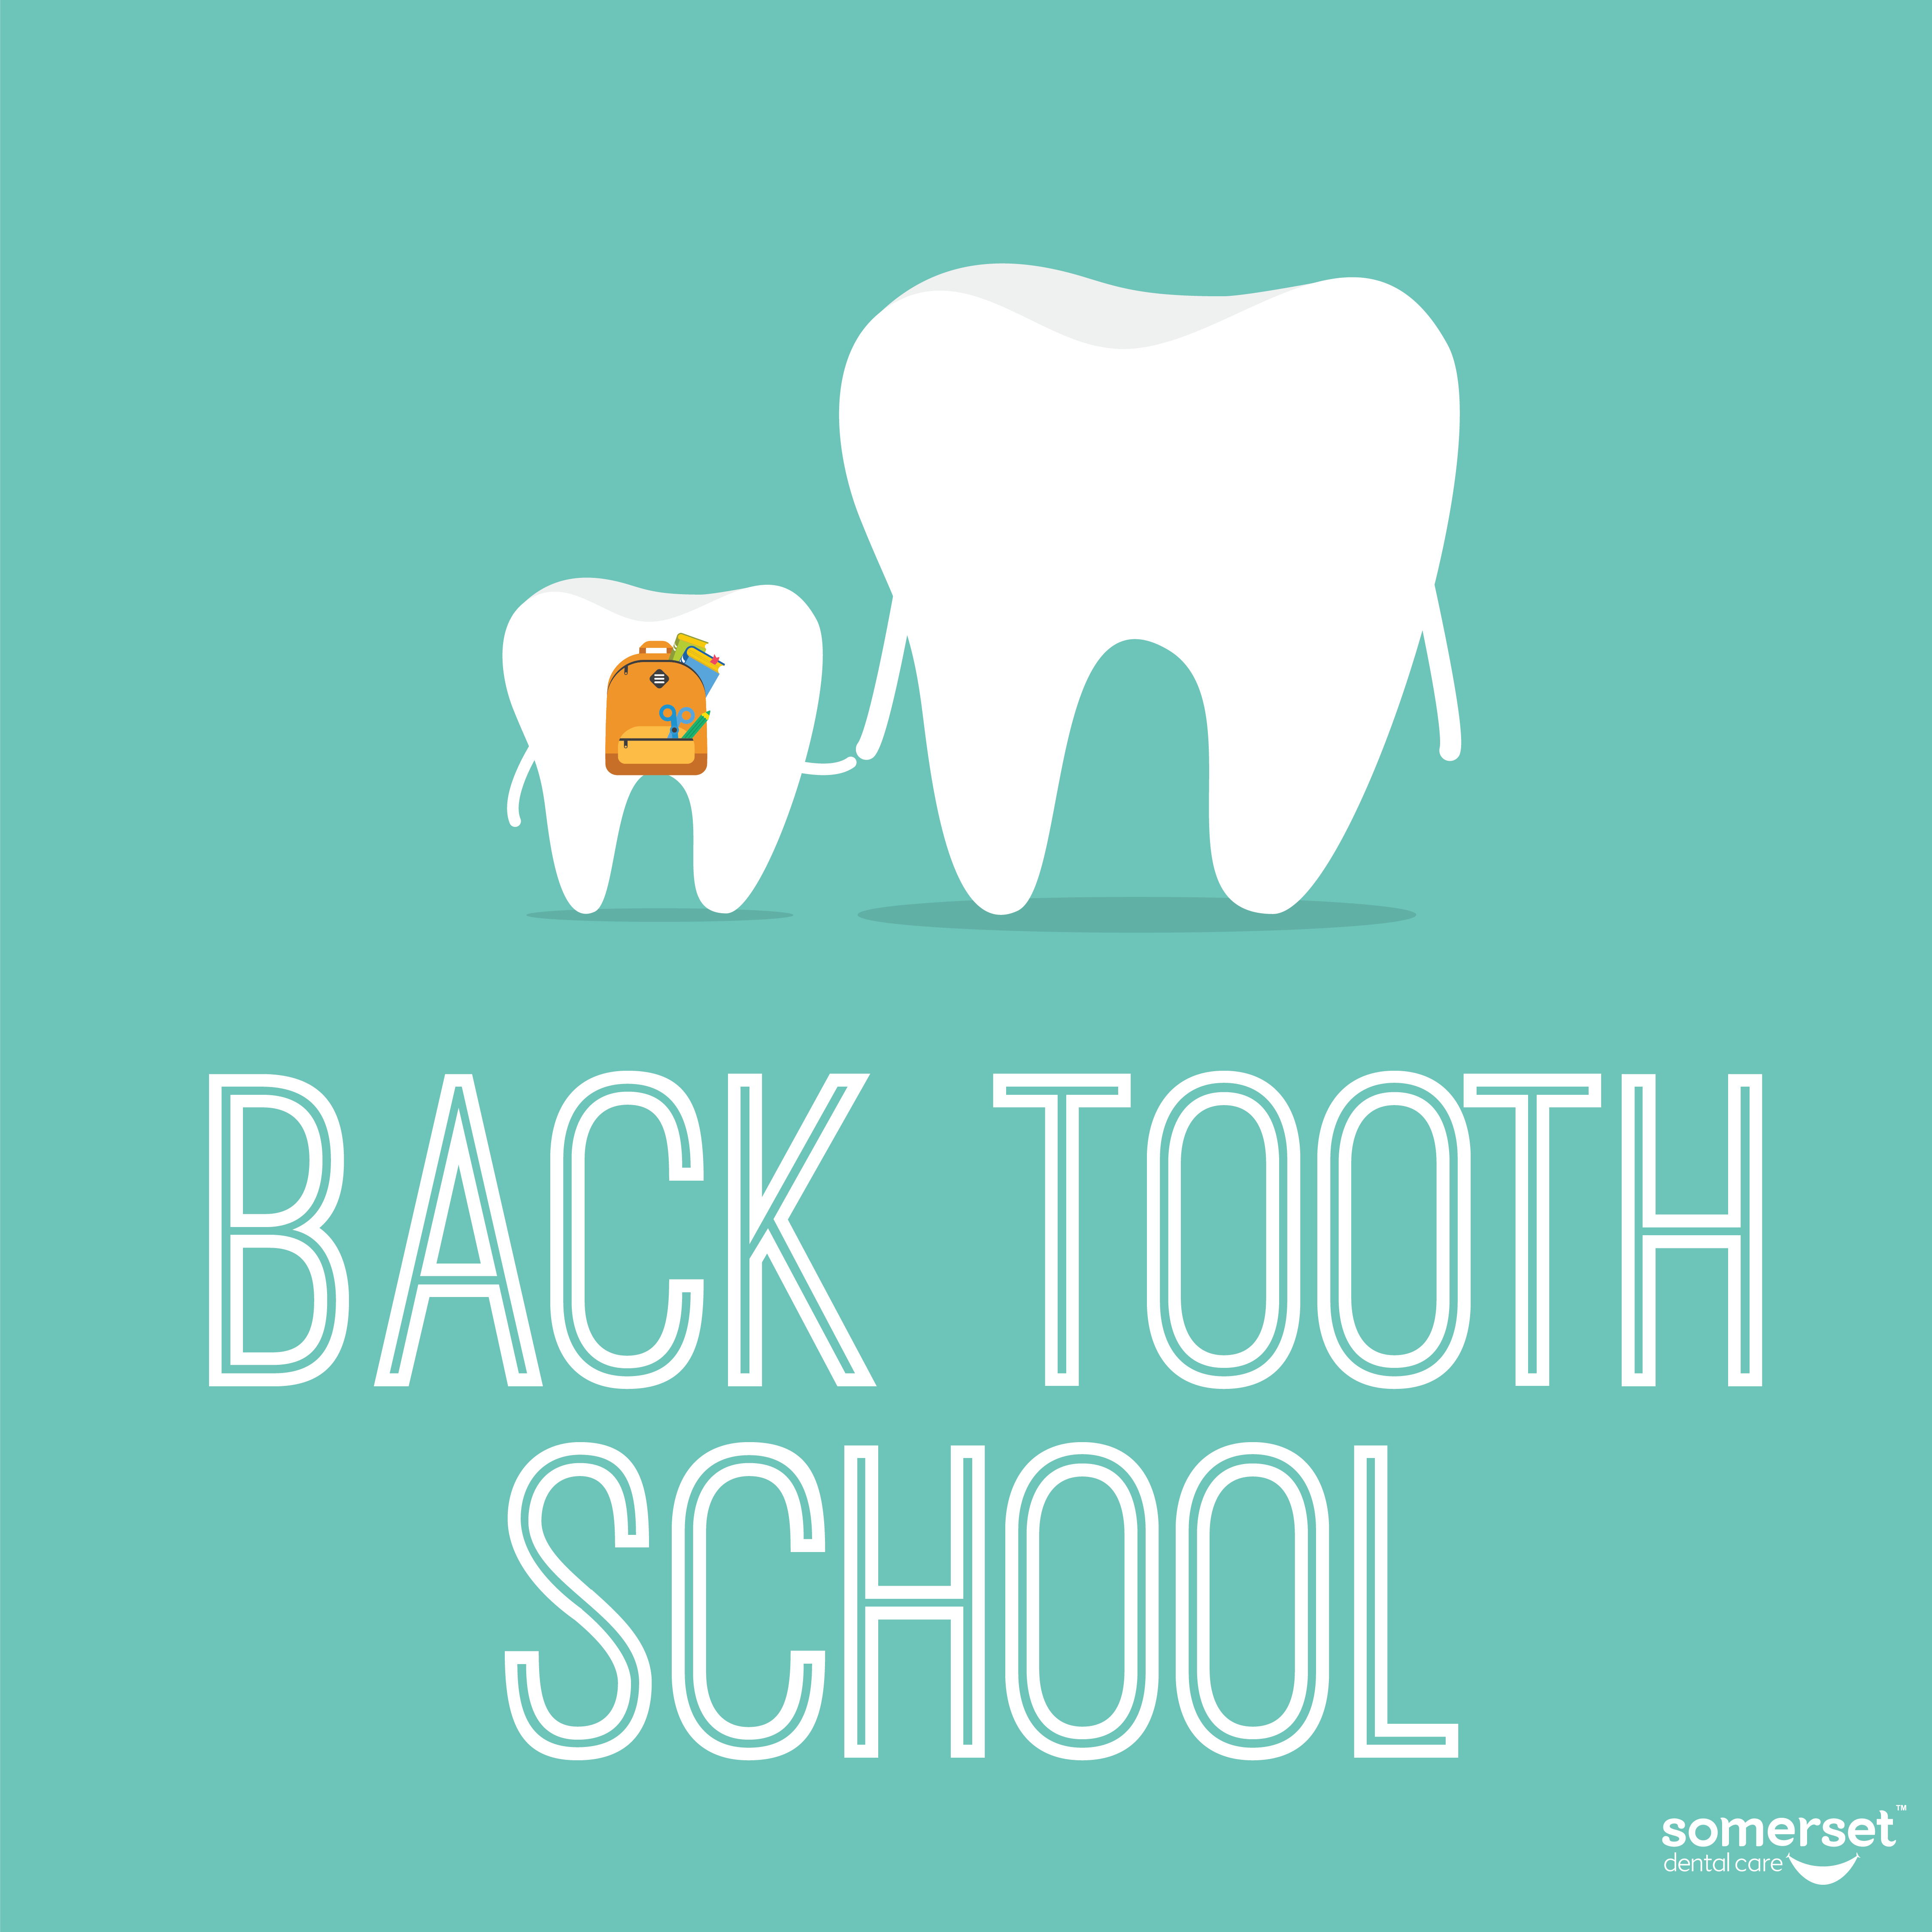 Back Tooth School